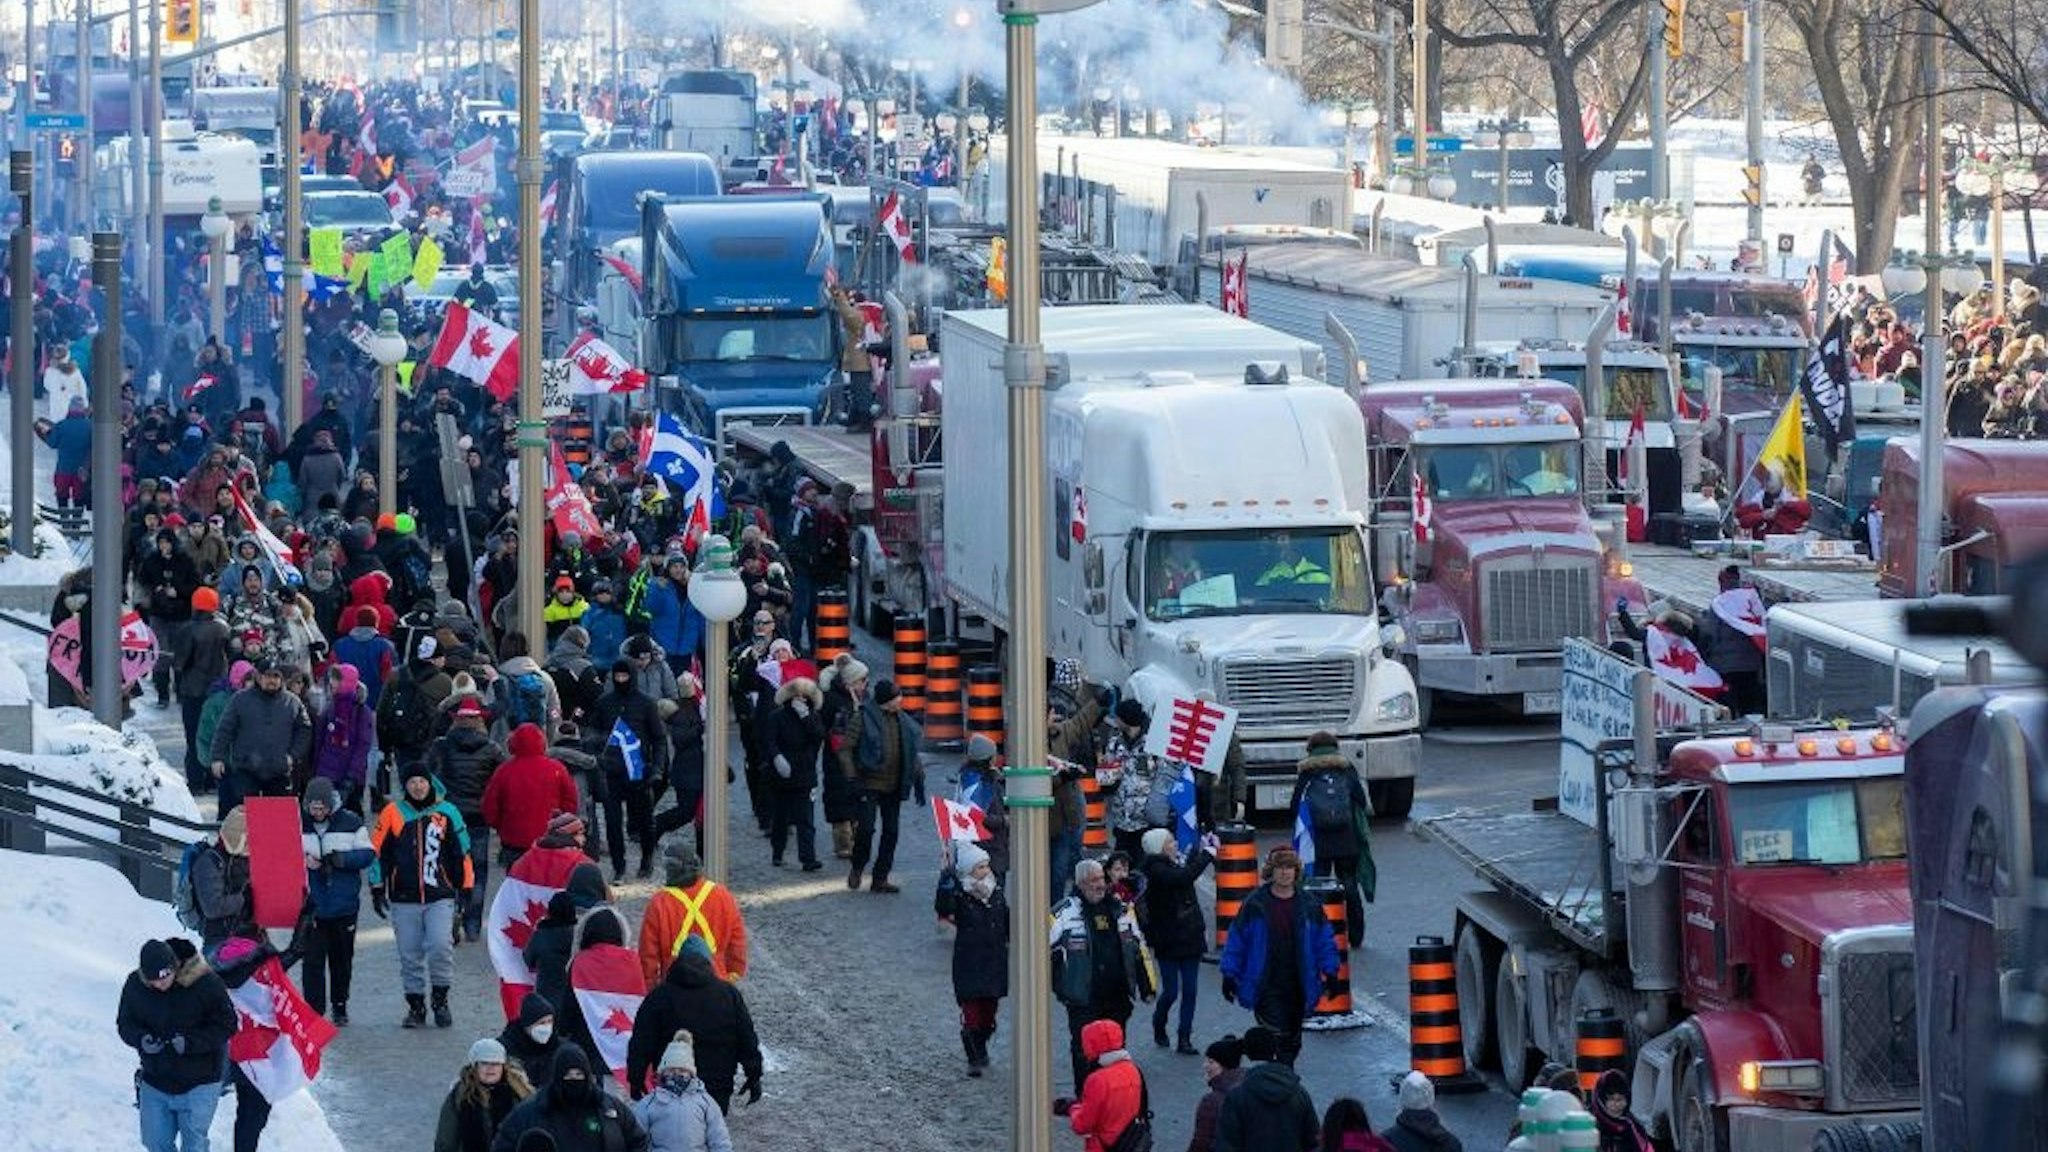 Supporters arrive at Parliament Hill for the Freedom Truck Convoy to protest against Covid-19 vaccine mandates and restrictions in Ottawa, Canada, on January 29, 2022.